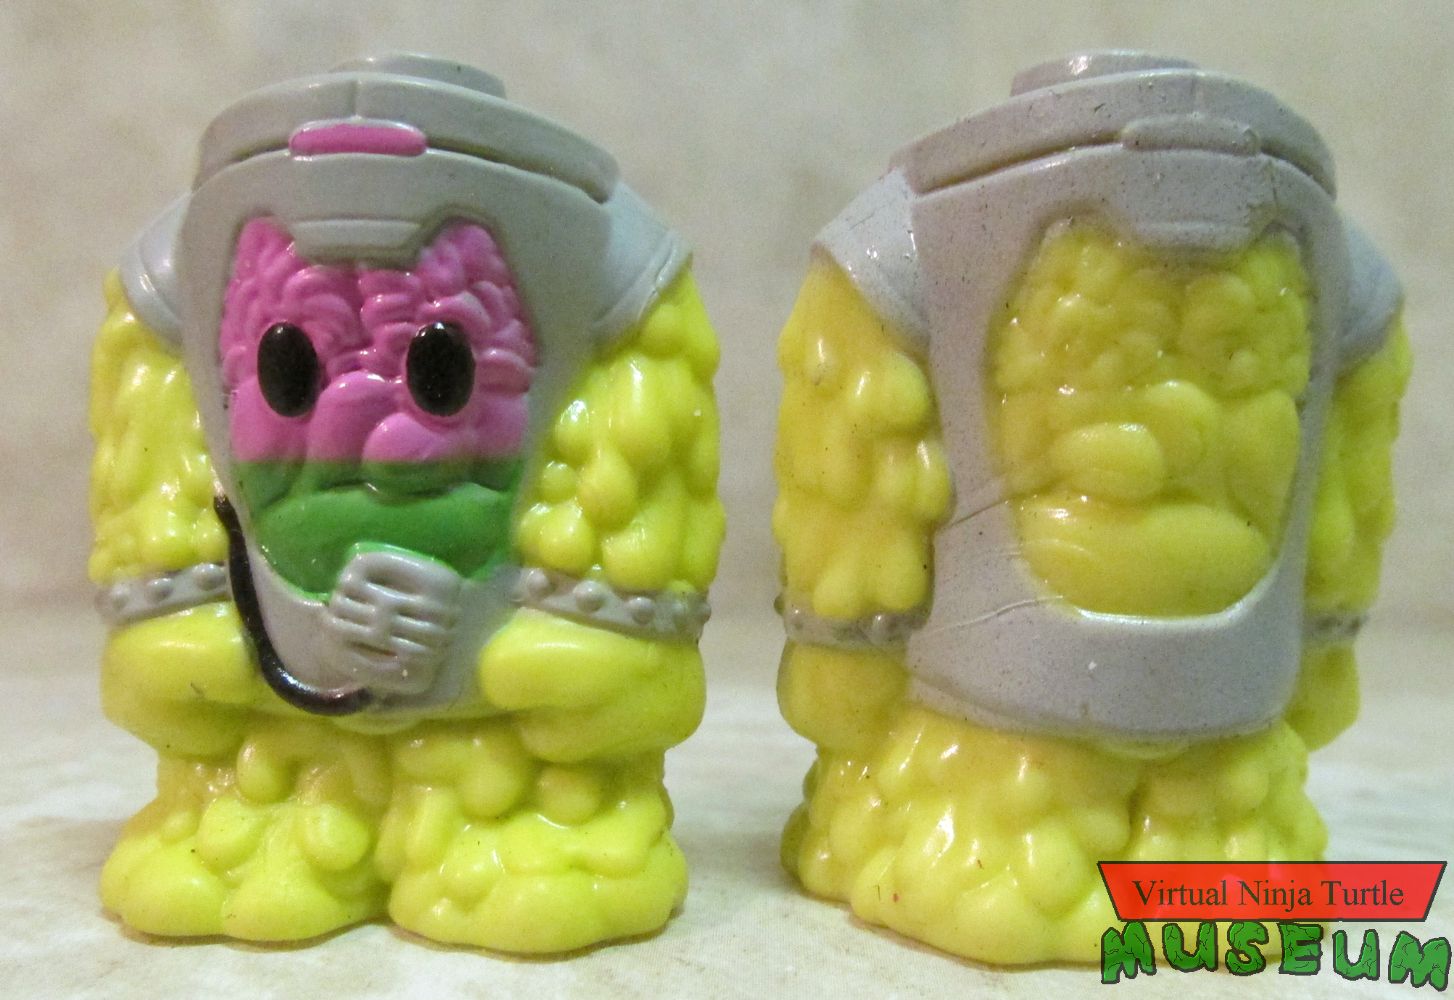 Mutagen-Man front and back